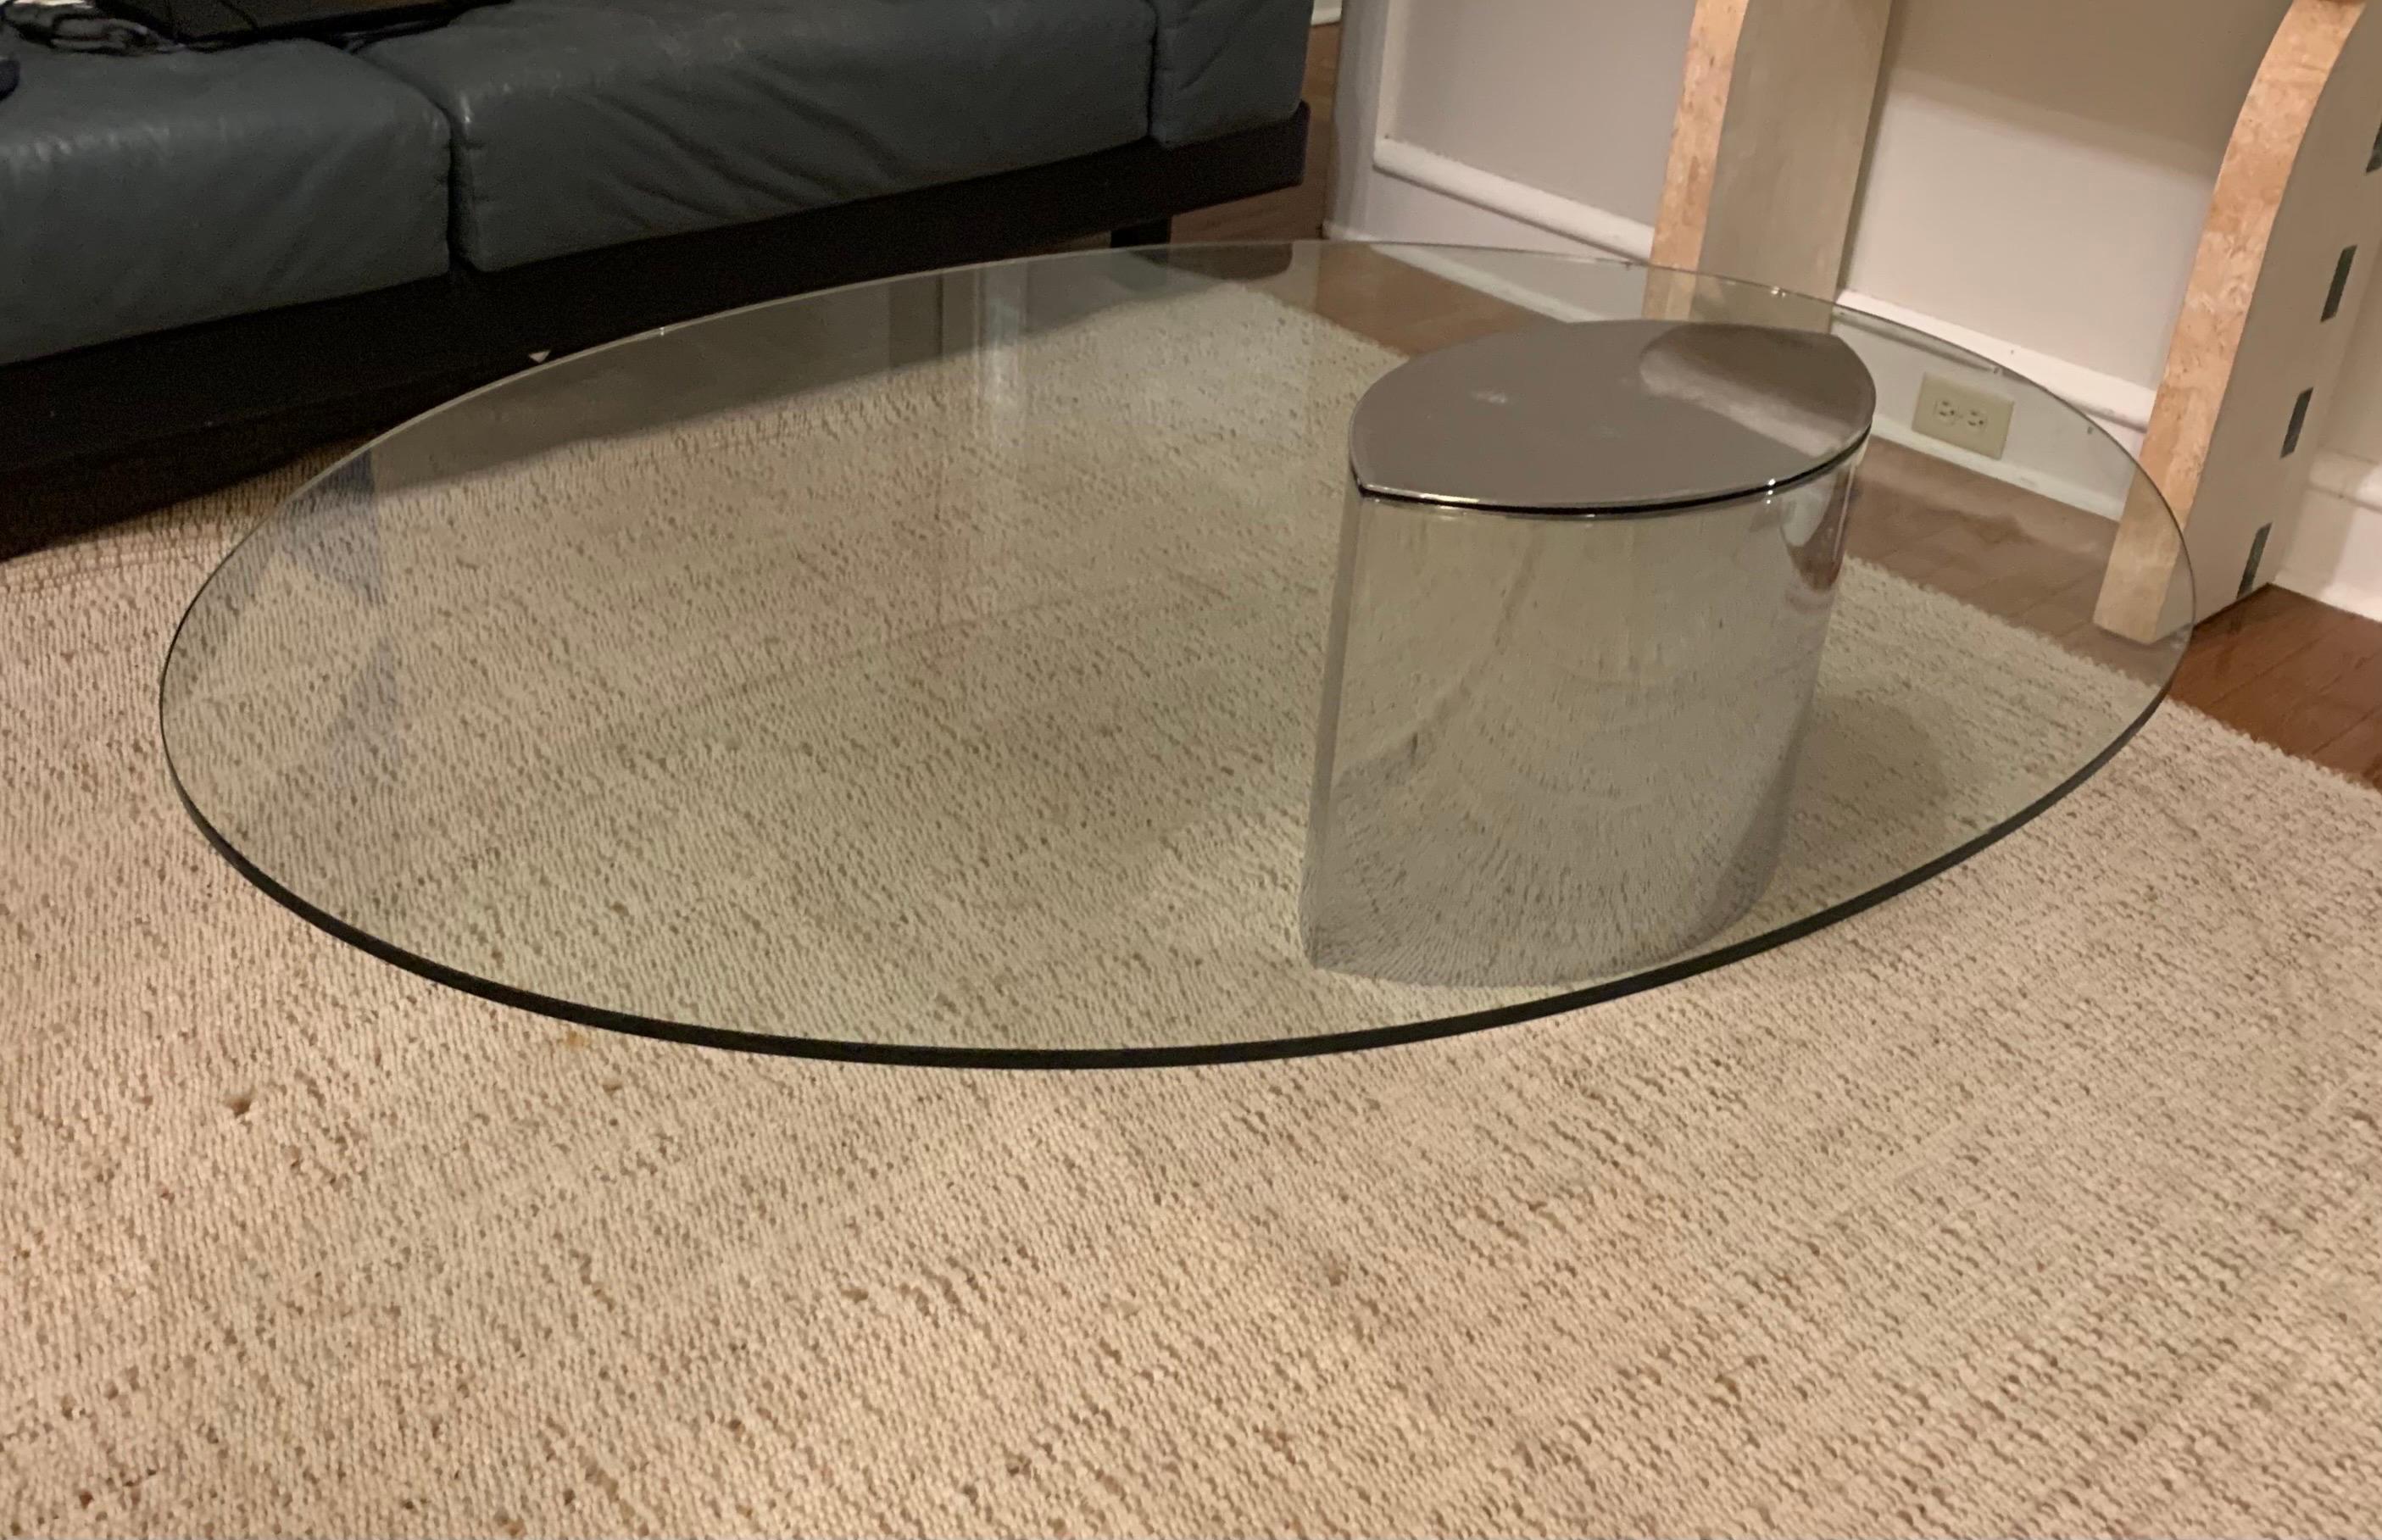 This is an early ‘Lunario’ coffee table, designed in 1968 by Cini Boeri for Gavina.

The piece features a chromed-steel teardrop pedestal base, which is internally weighted to counterbalance its off-center oval glass tabletop.

The table retains its